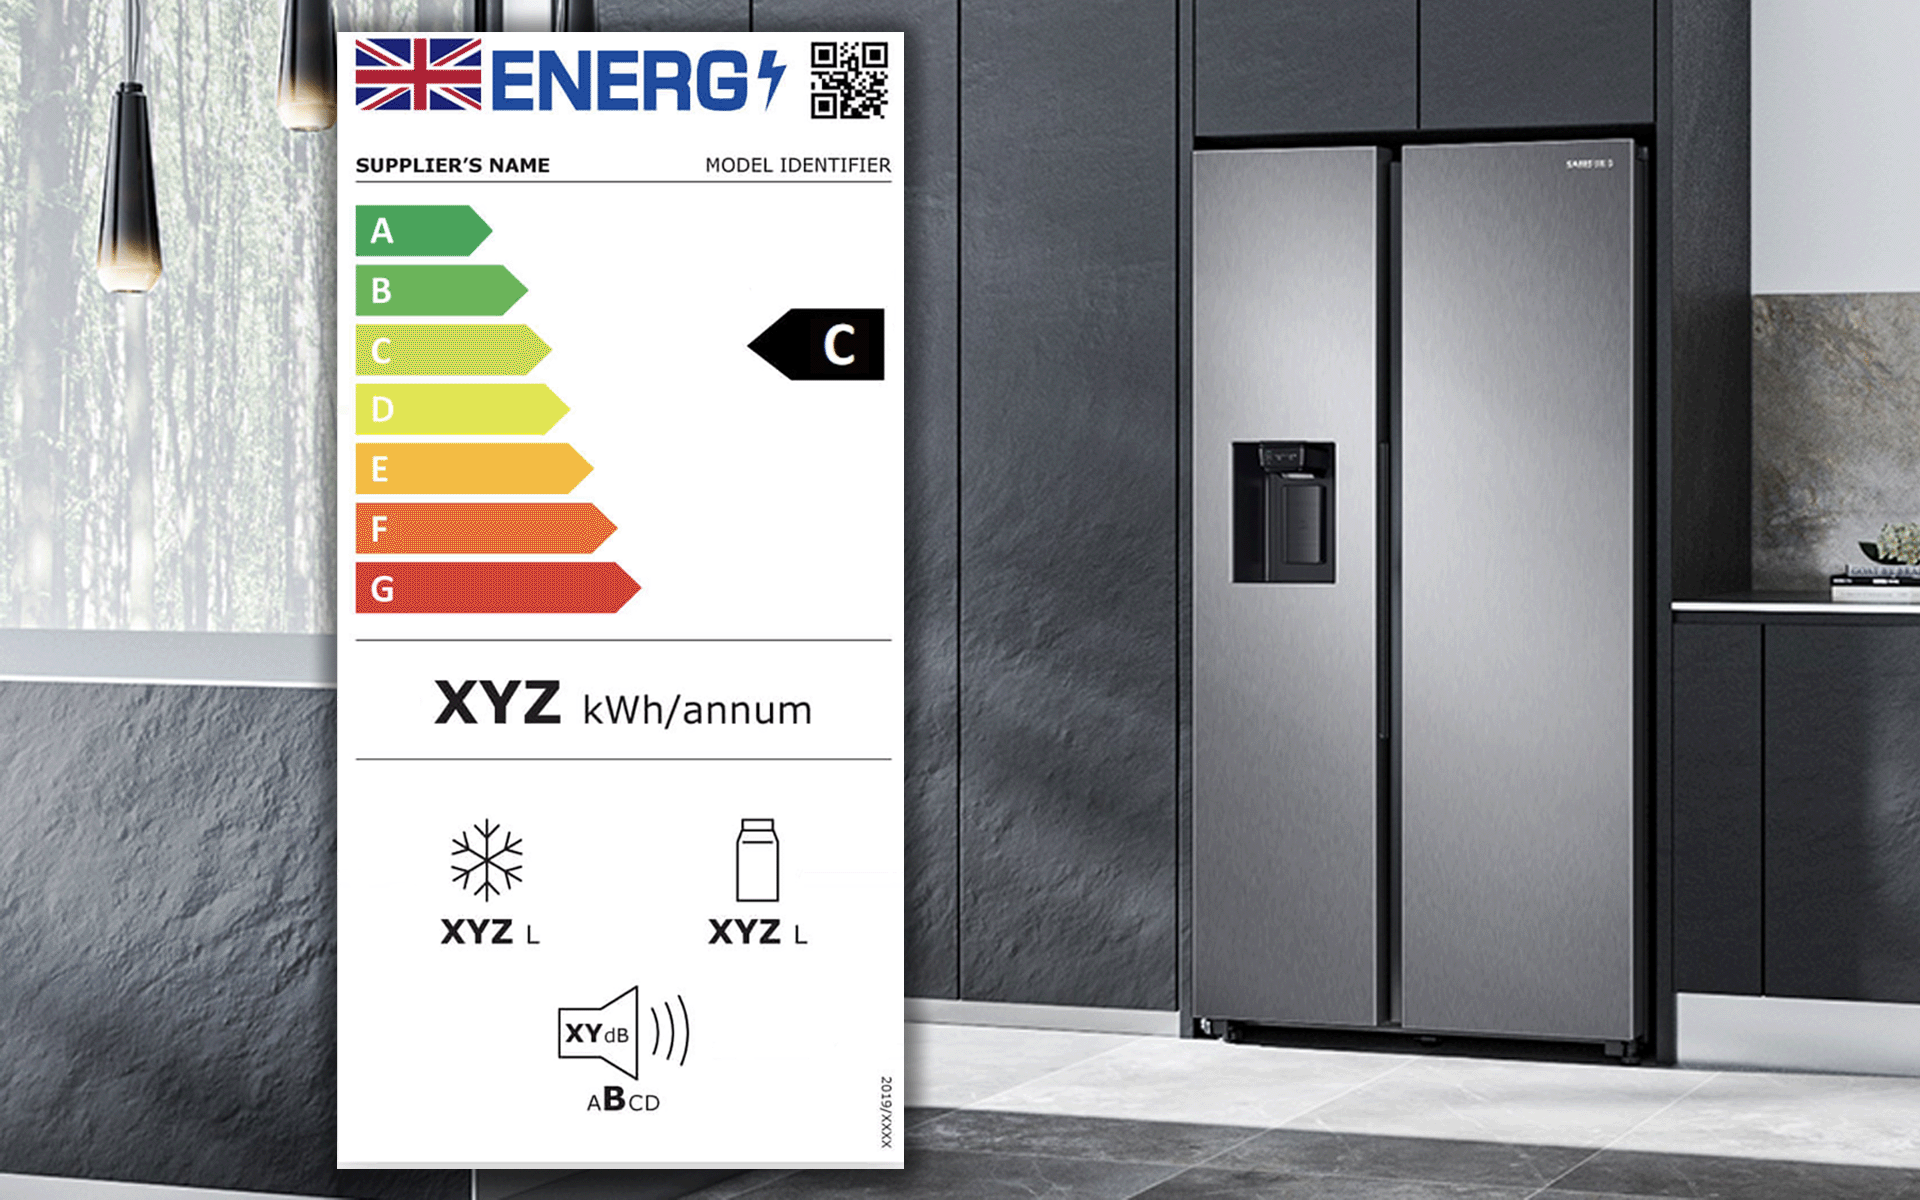 Samsung fridge freezer lifestyle image with an example energy efficiency label guide